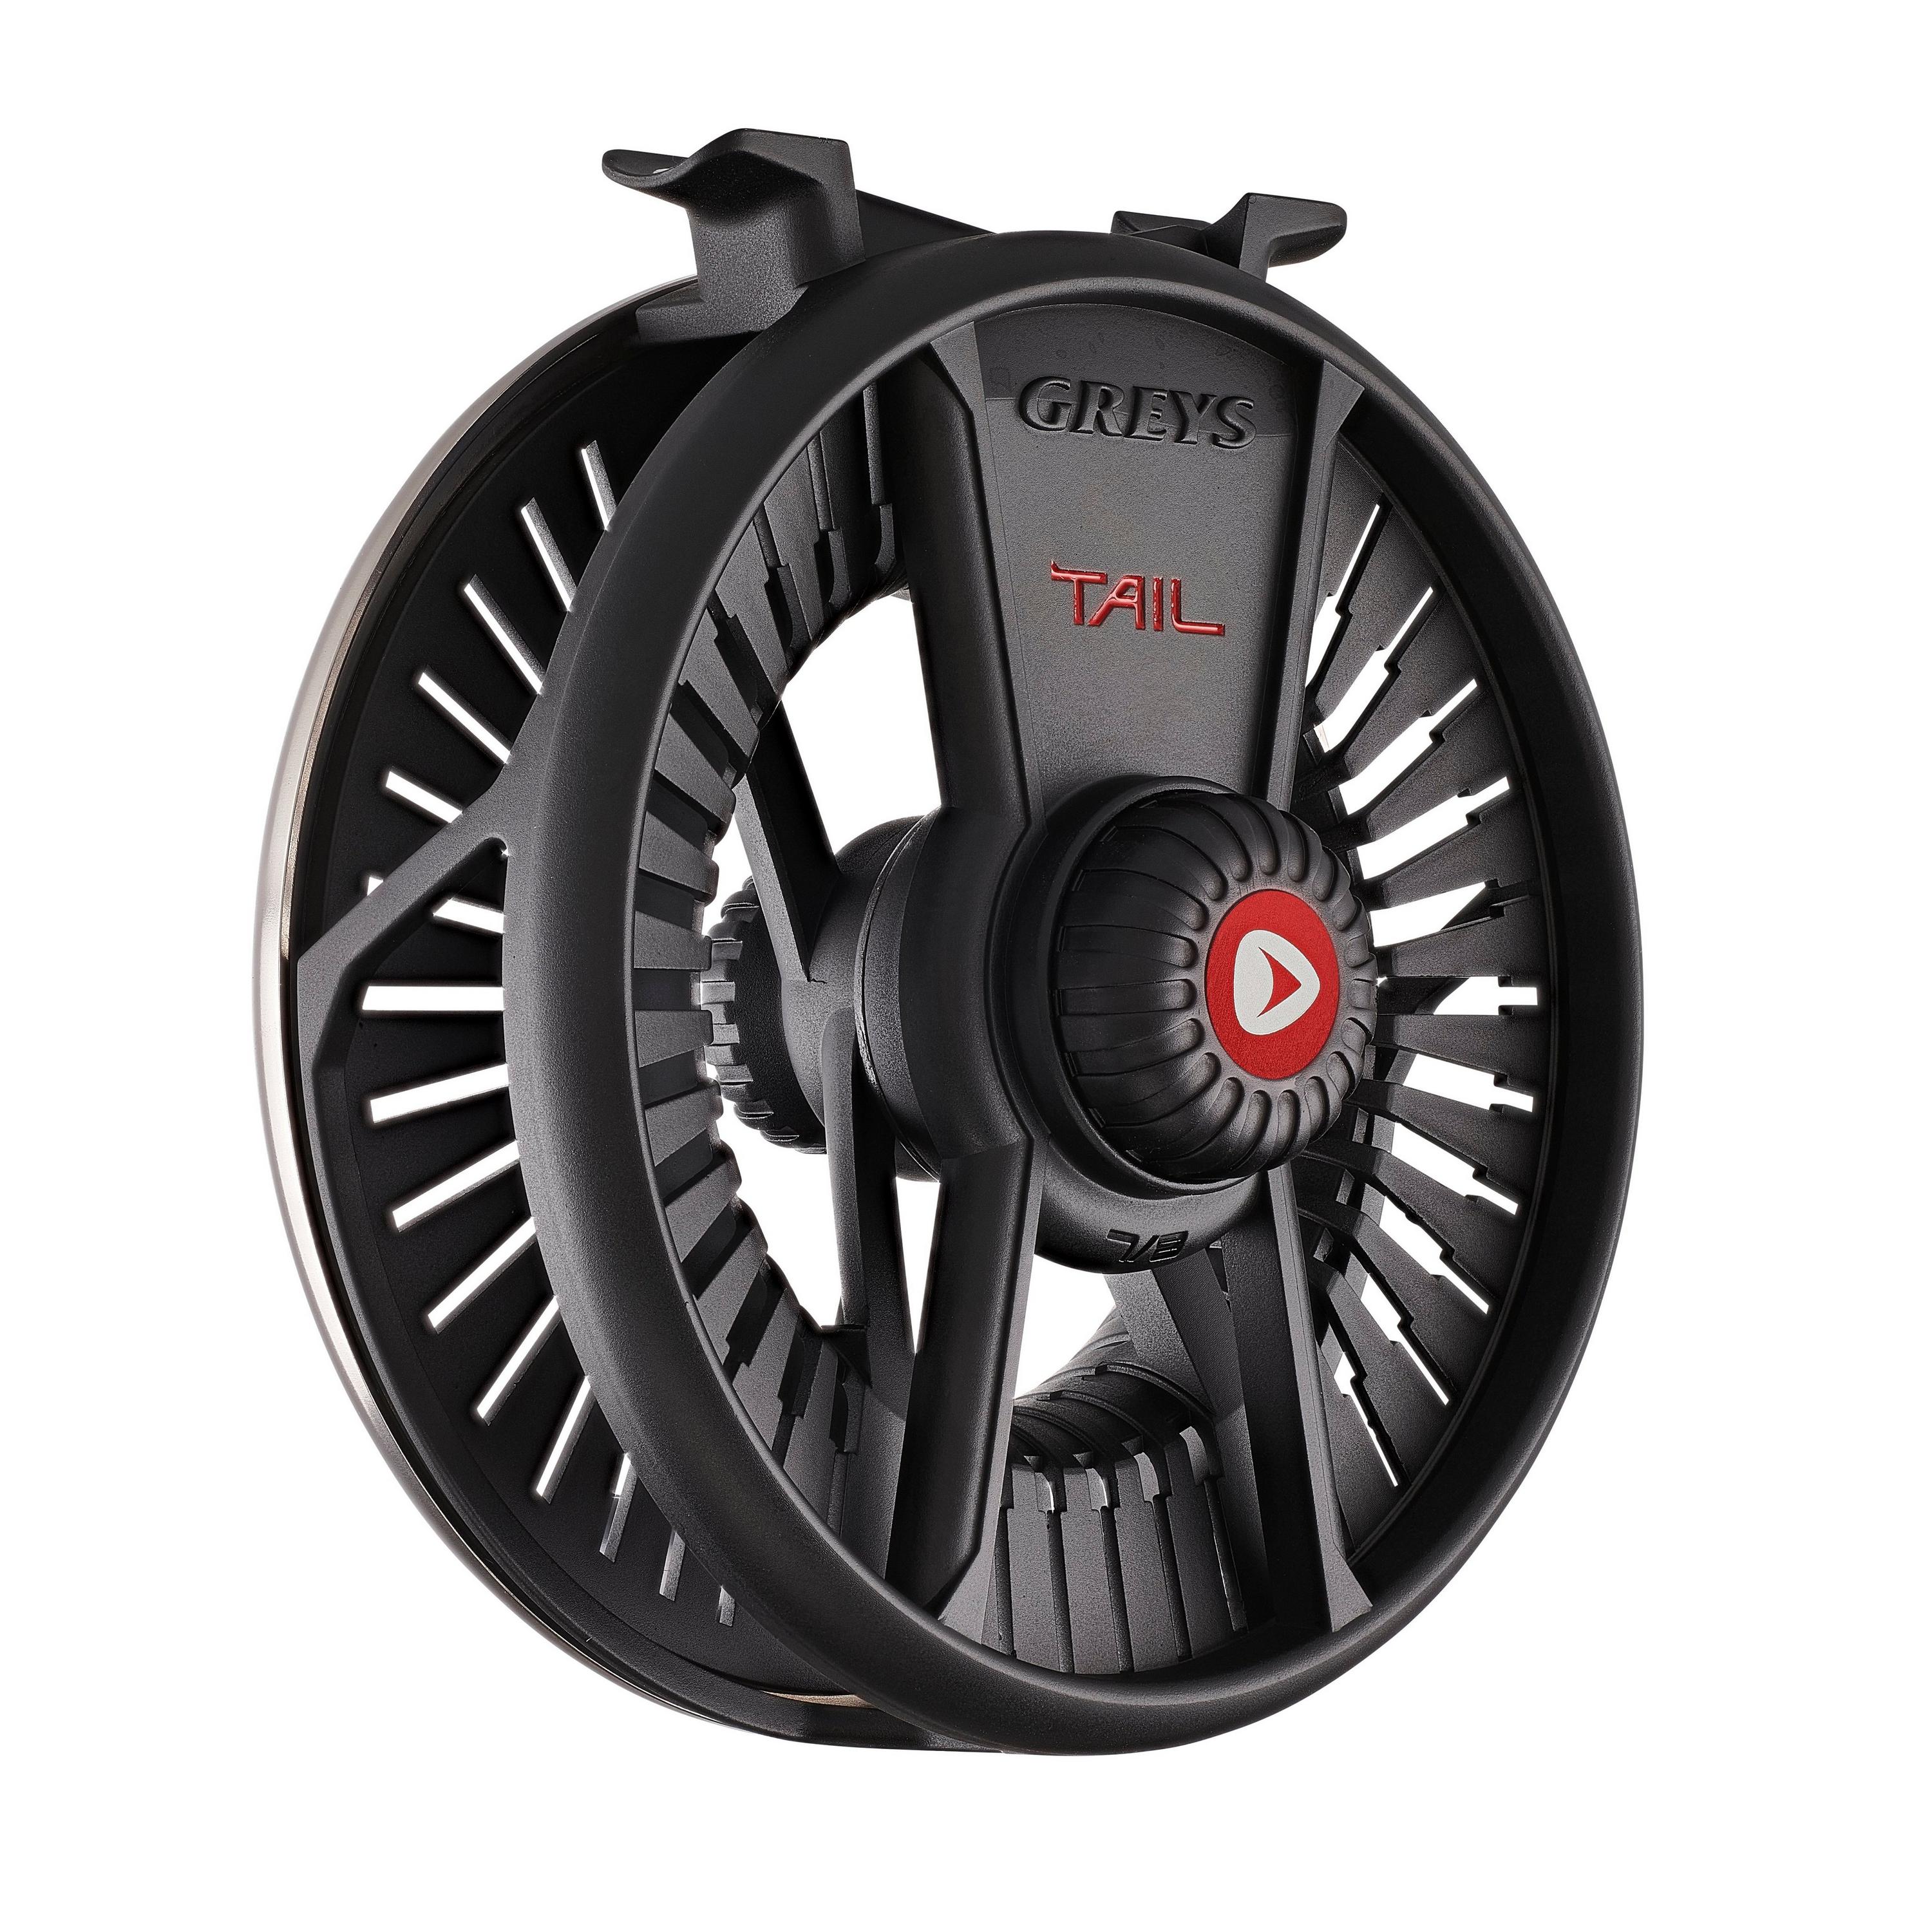 Greys Tail All-Water Fly Reel